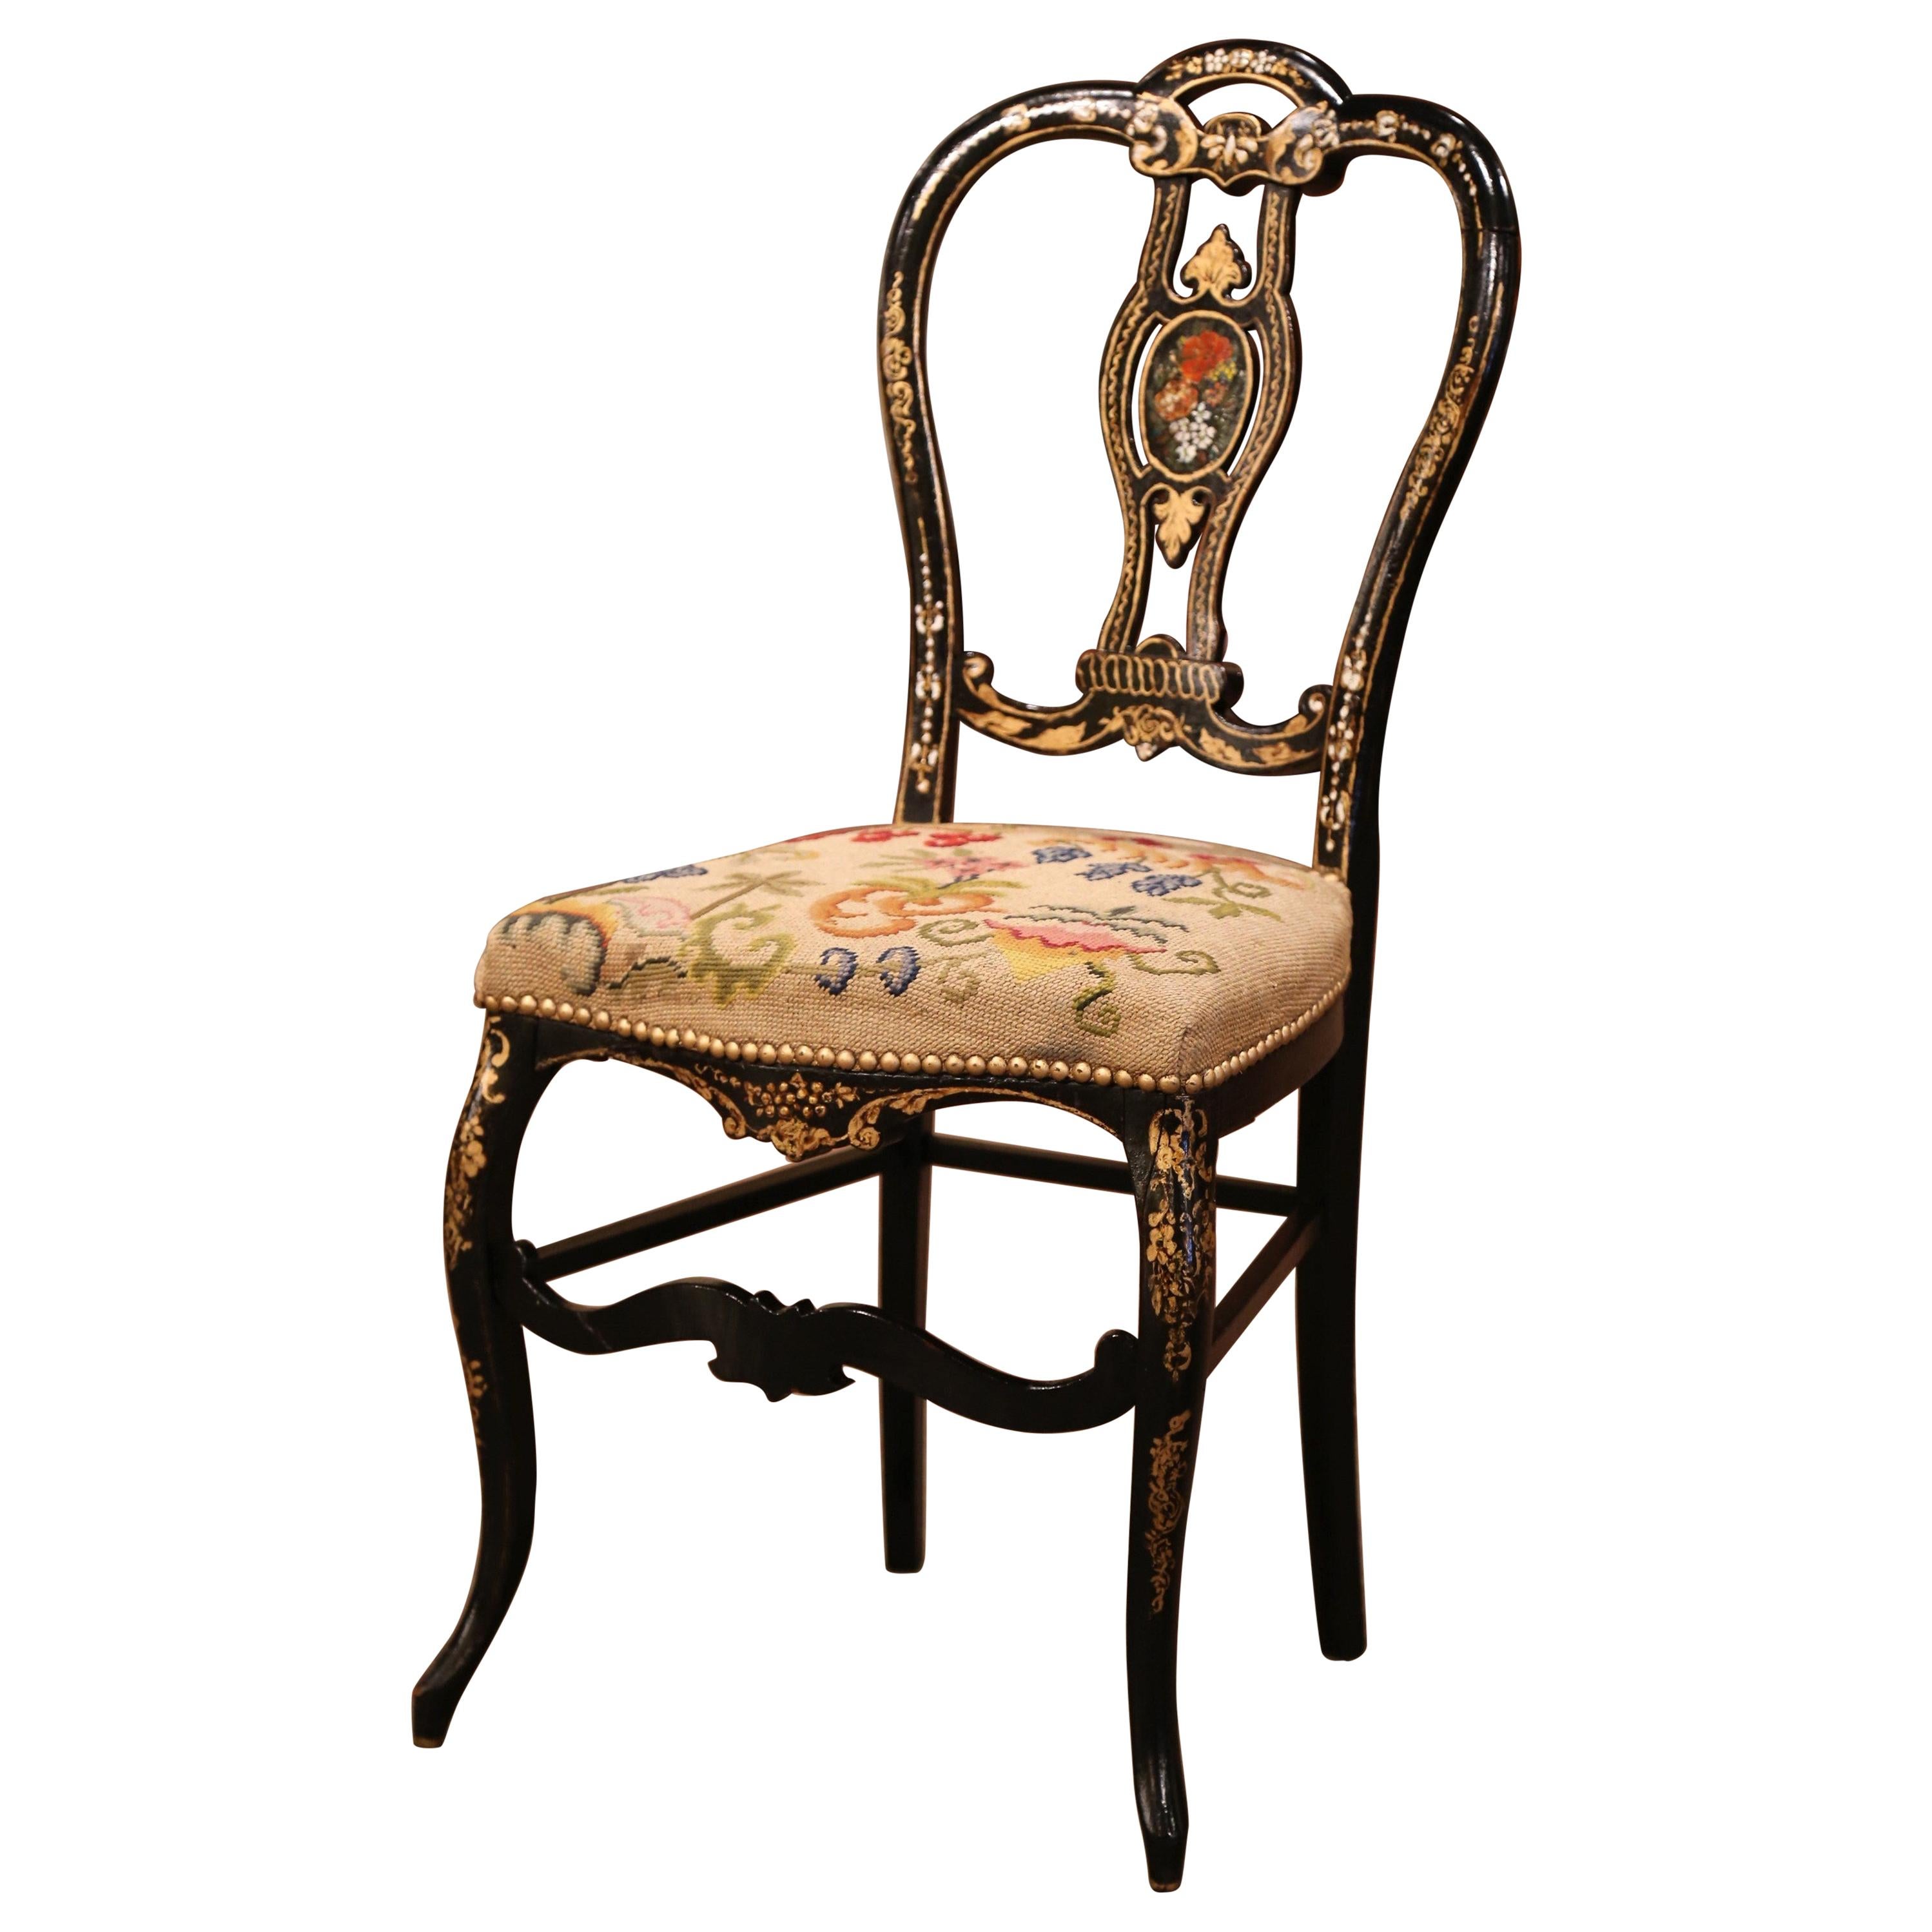 19th Century Napoleon III Black Lacquered and Gilt Decorative Chair